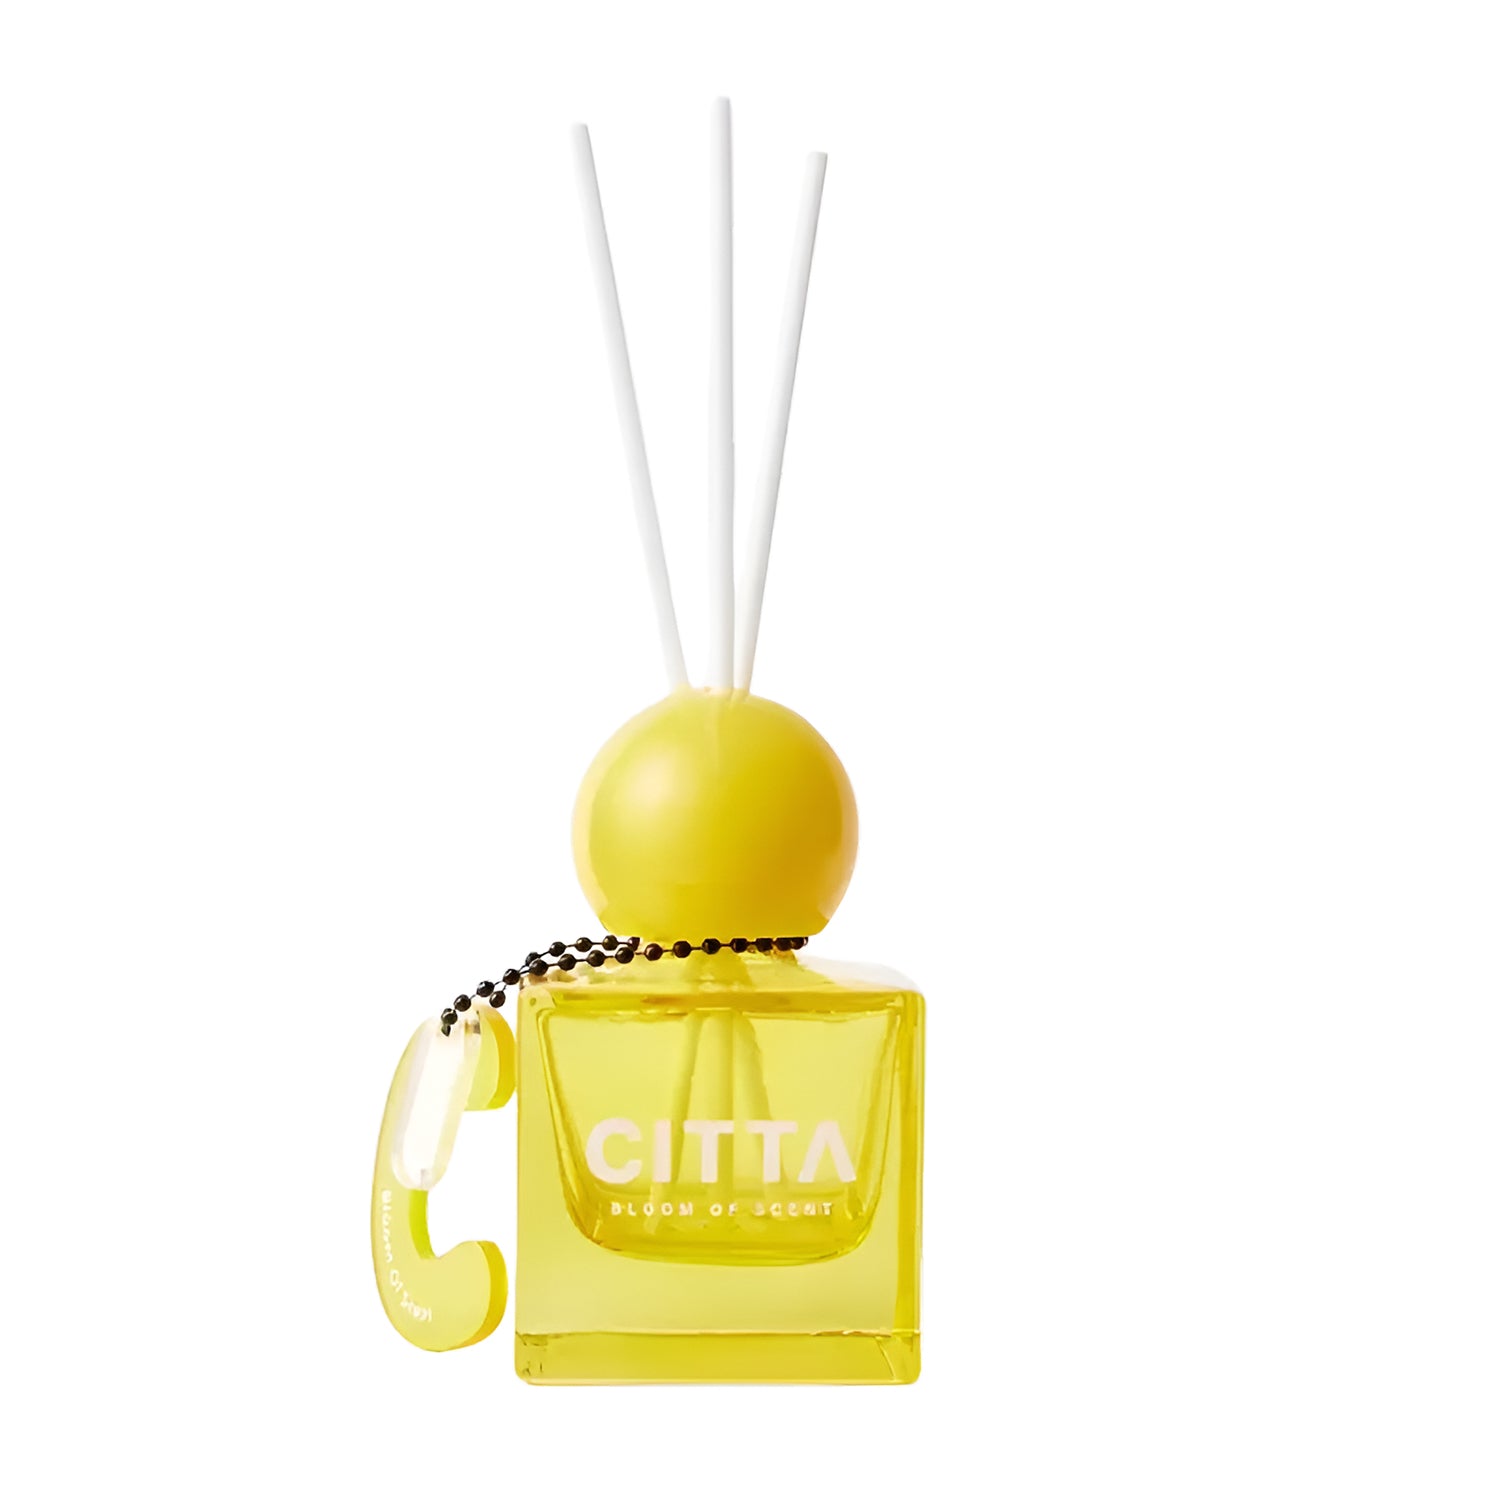 CITTA 50ML Reed Diffuser Set with Reed Sticks - Aromatherapy Essential Oil Home Fragrance Room Scented Reed Diffuser Refill